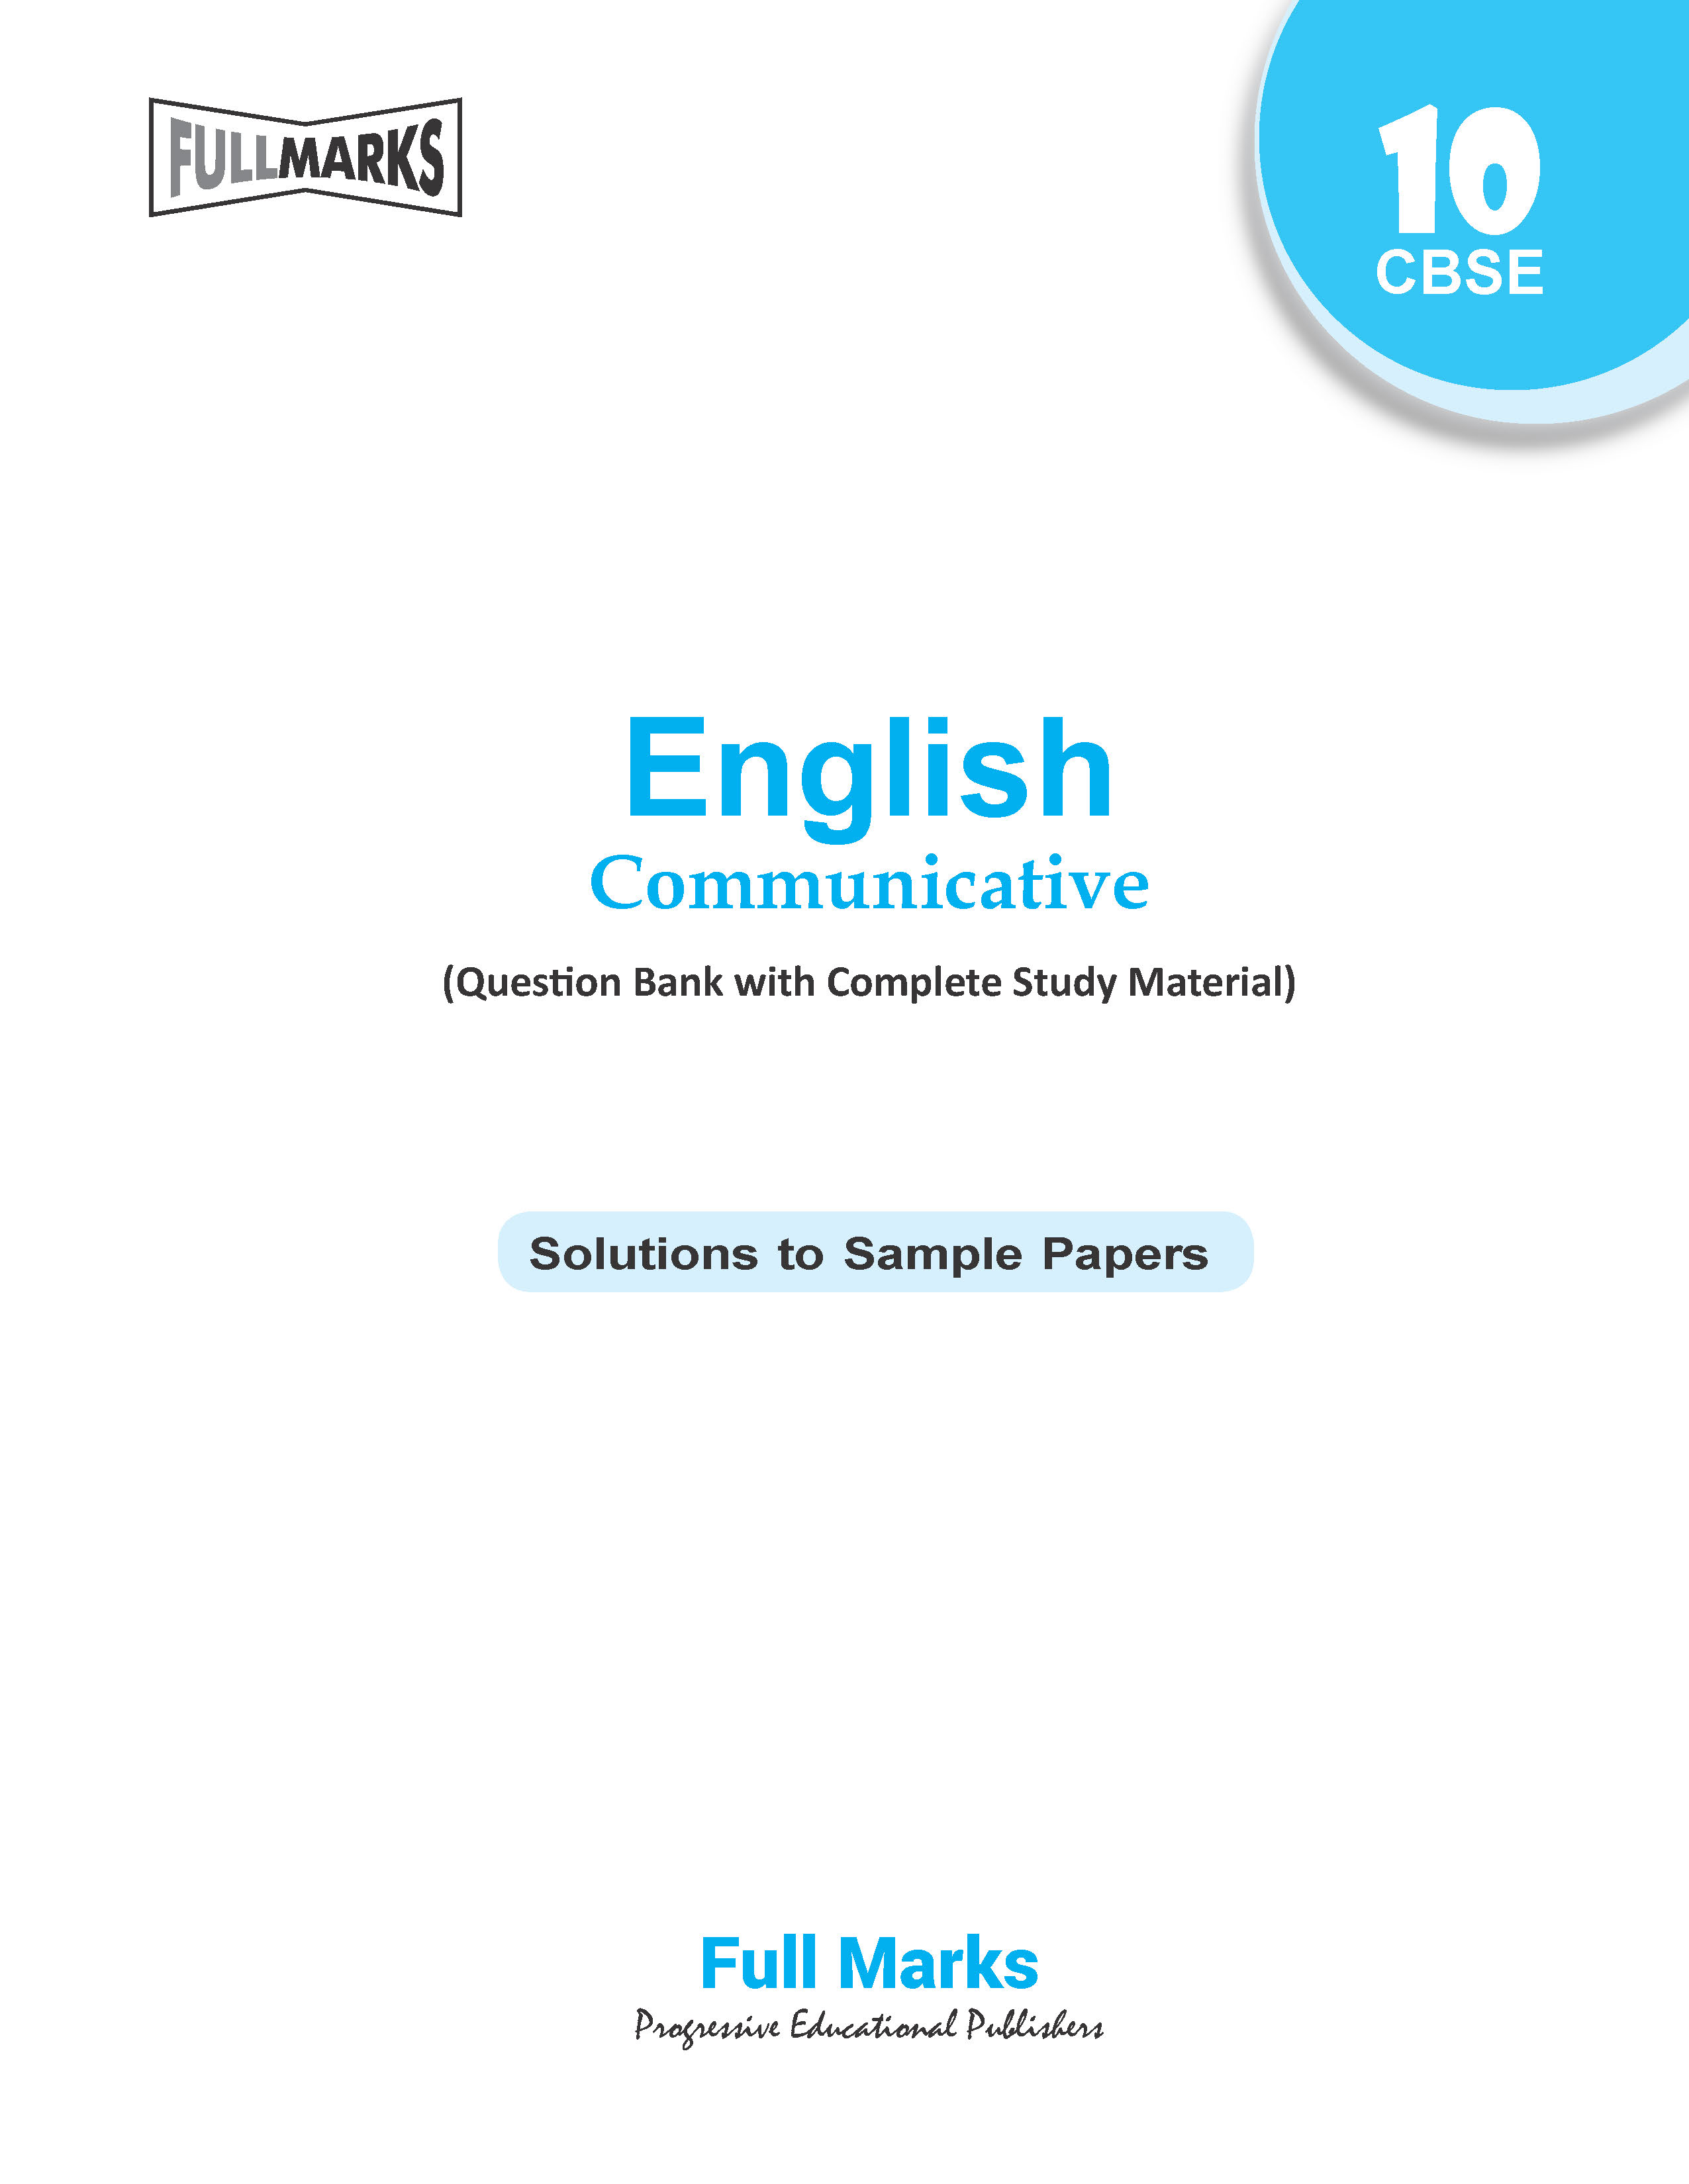 English Communicative (Question Bank with Complete Study Material) Class 10